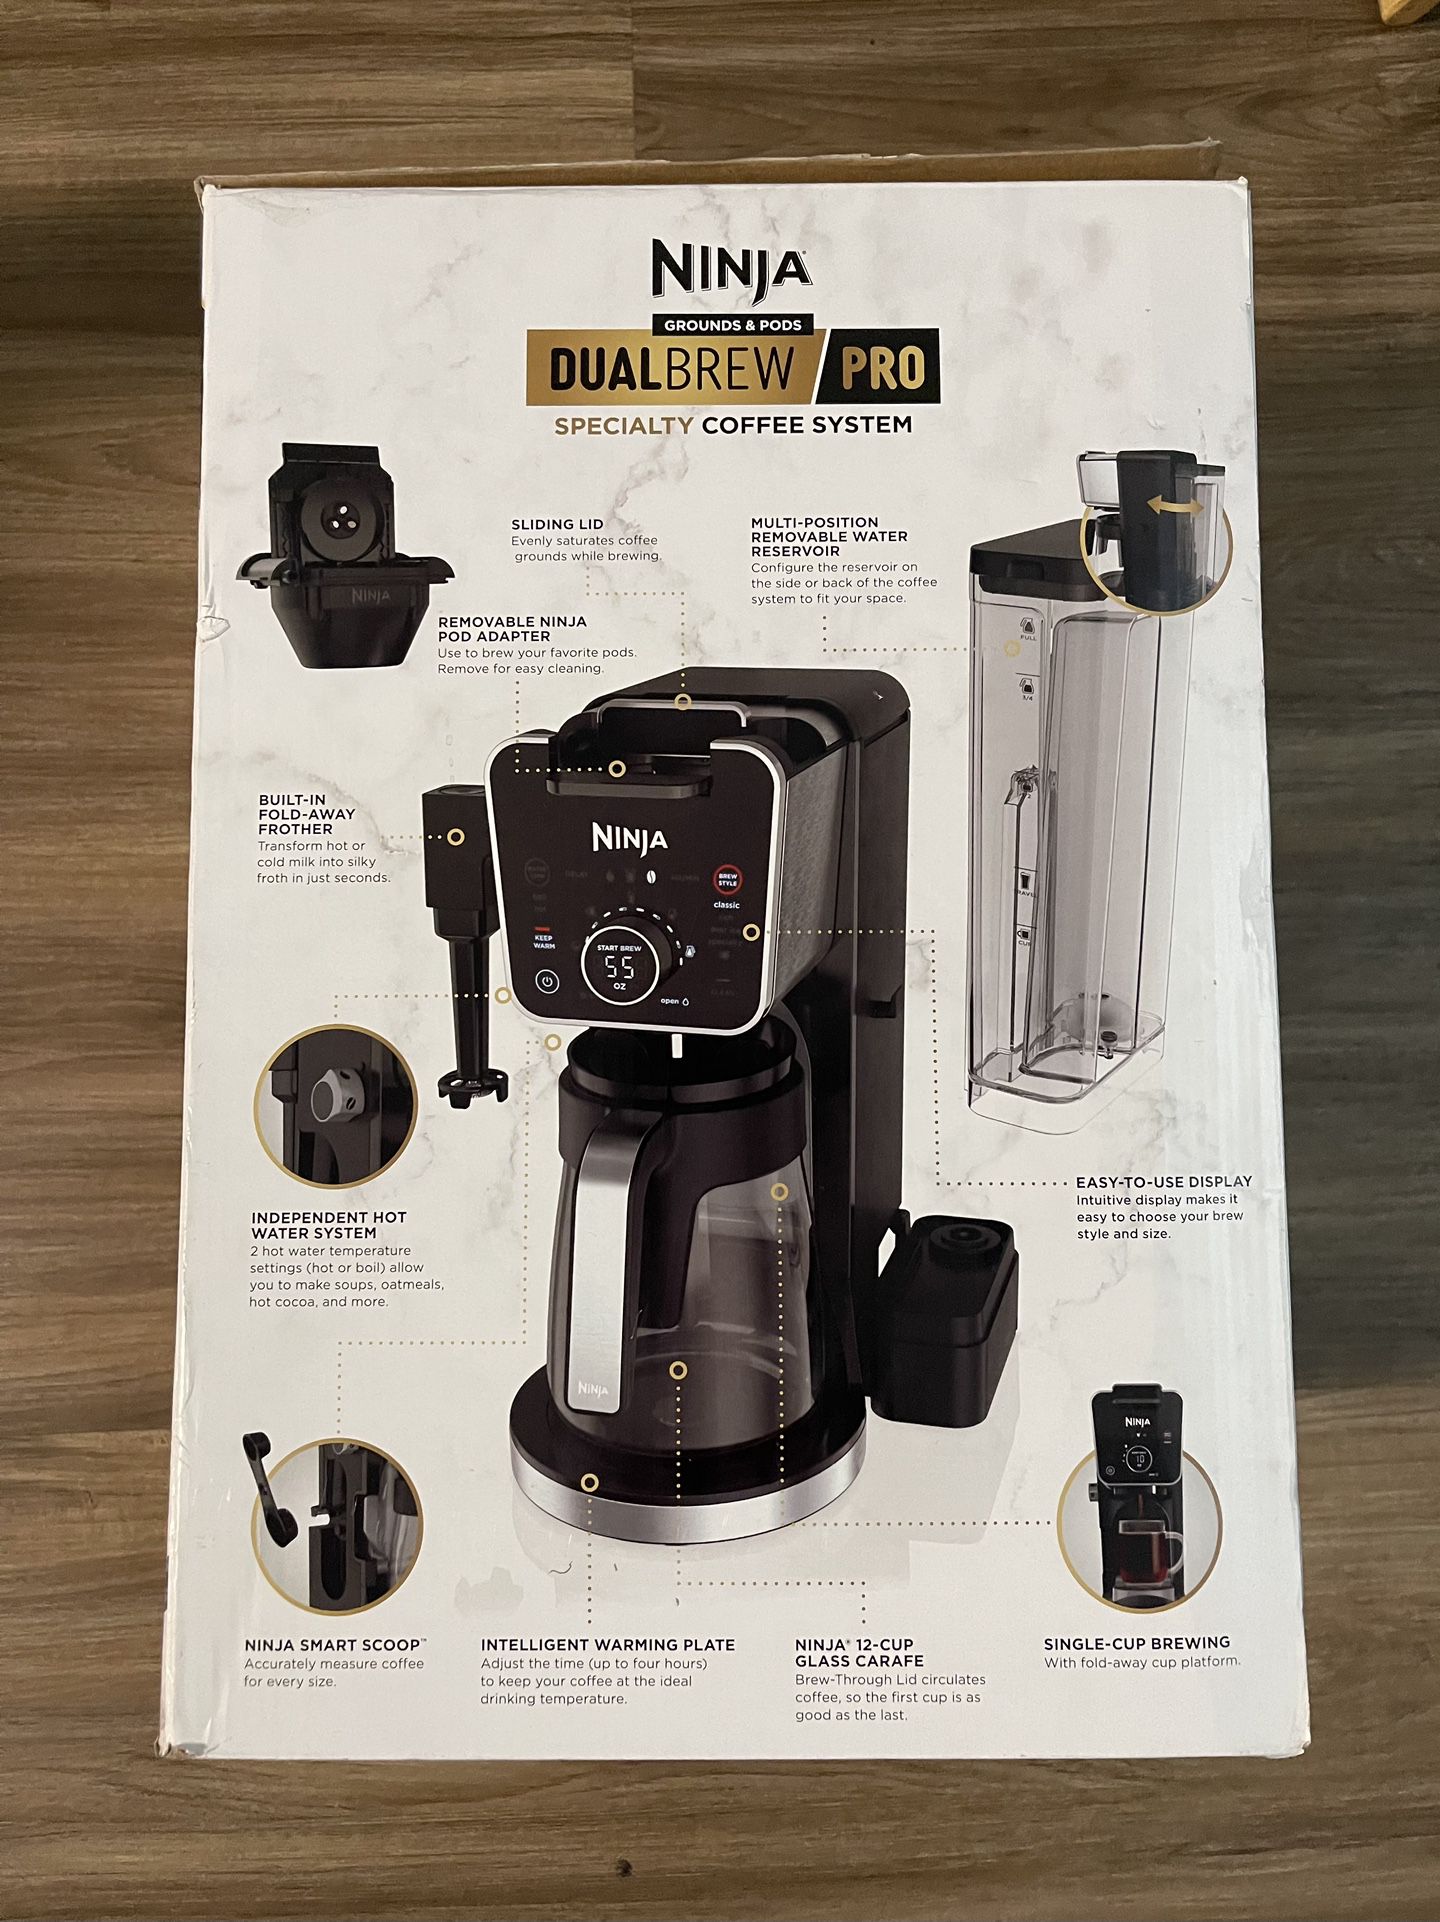 Ninja's DualBrew Pro Coffee Maker with frother up to $130 off